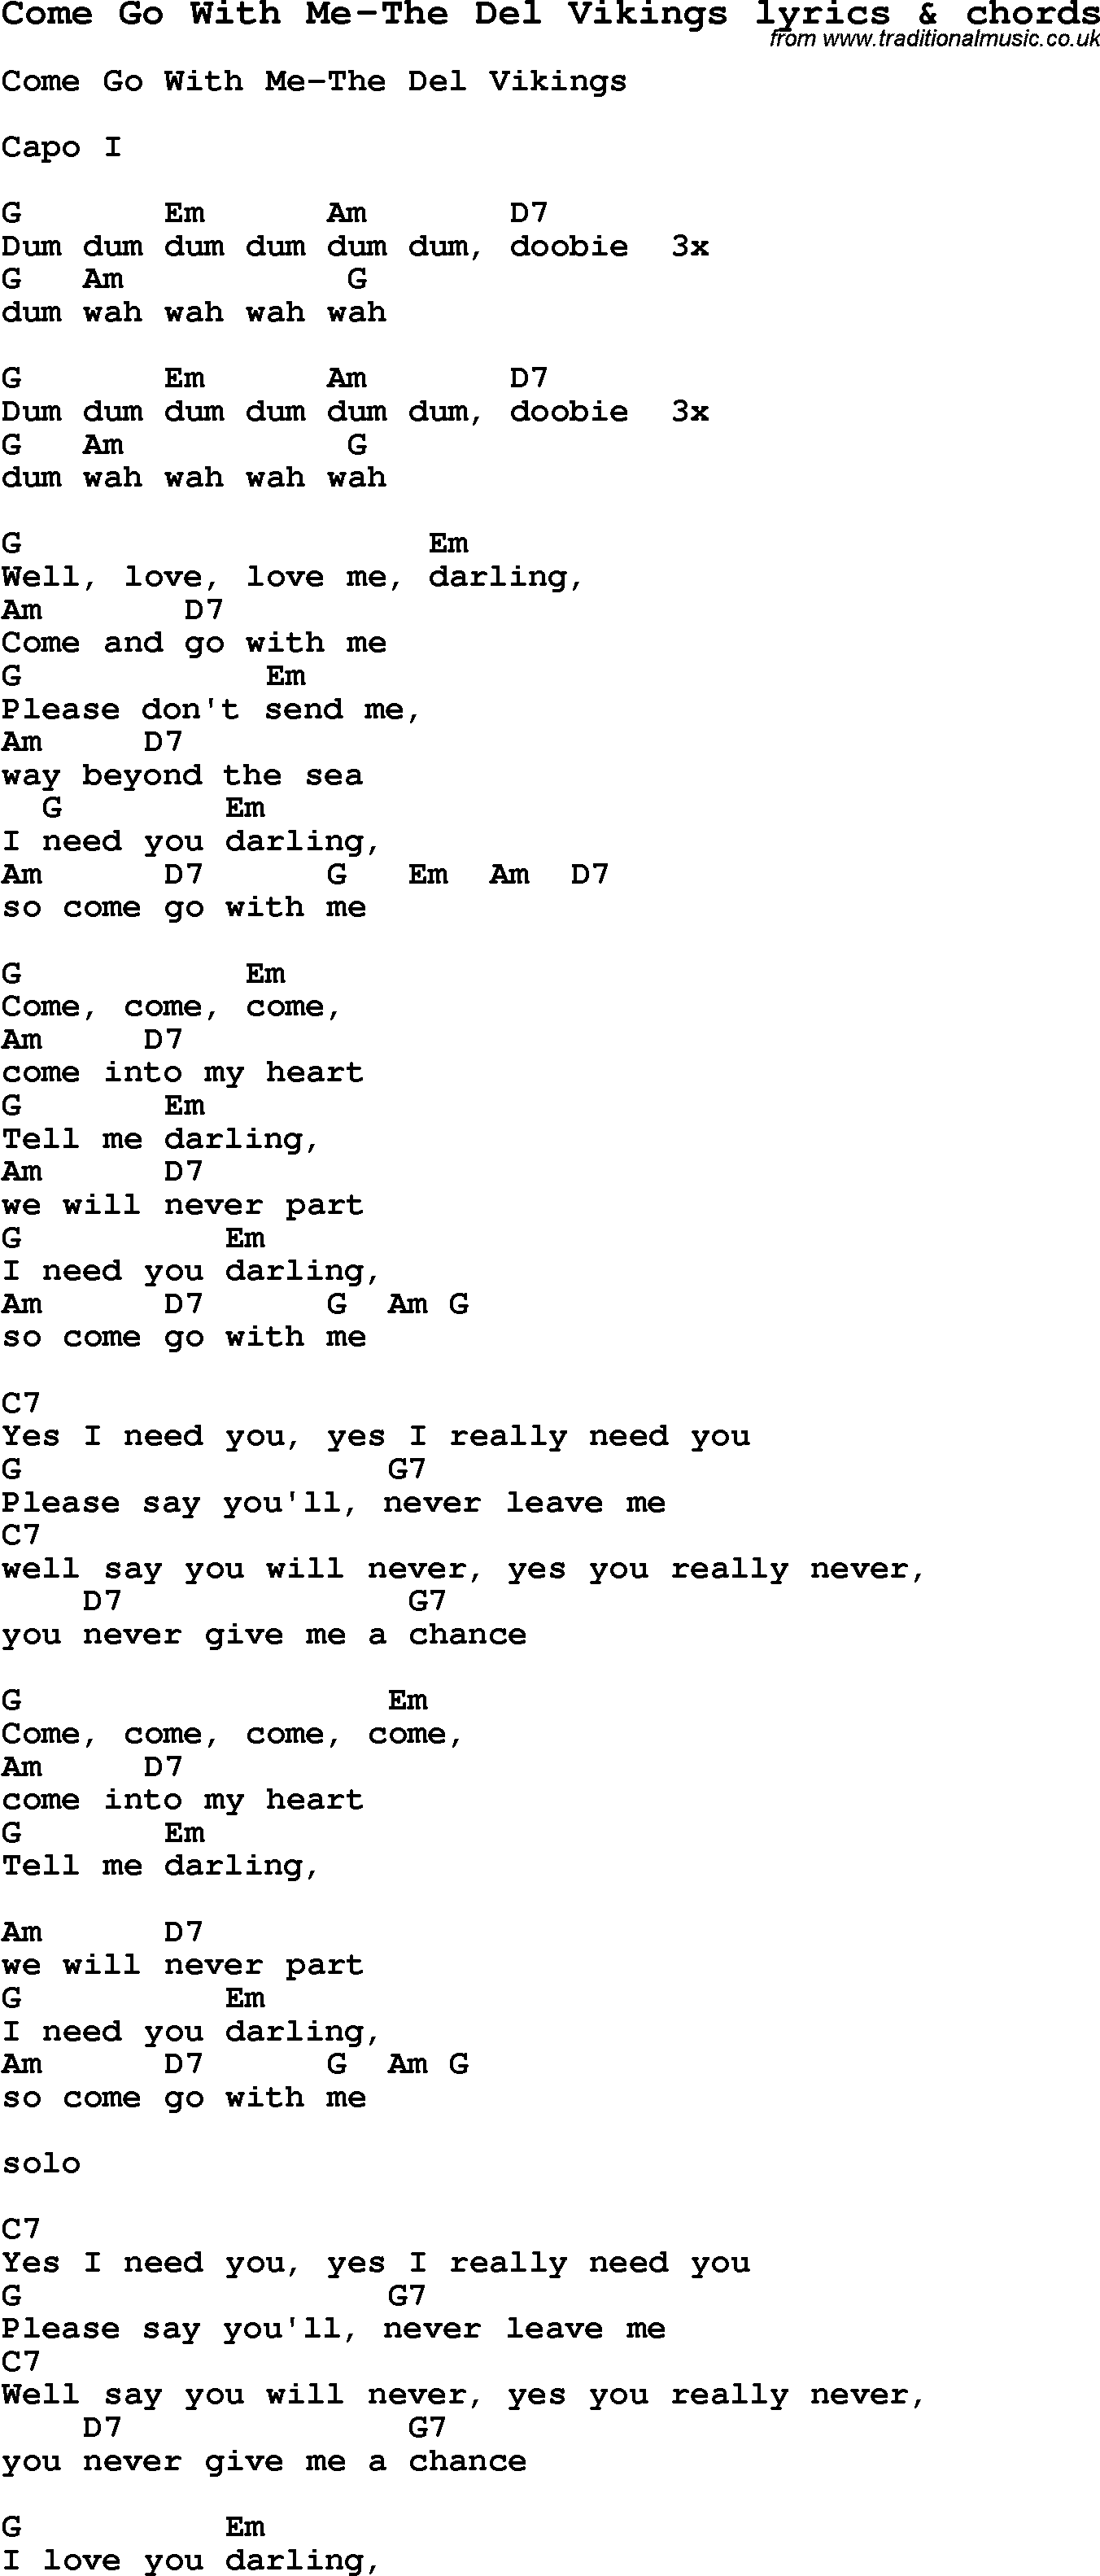 Love Song Lyrics for: Come Go With Me-The Del Vikings with chords for Ukulele, Guitar Banjo etc.